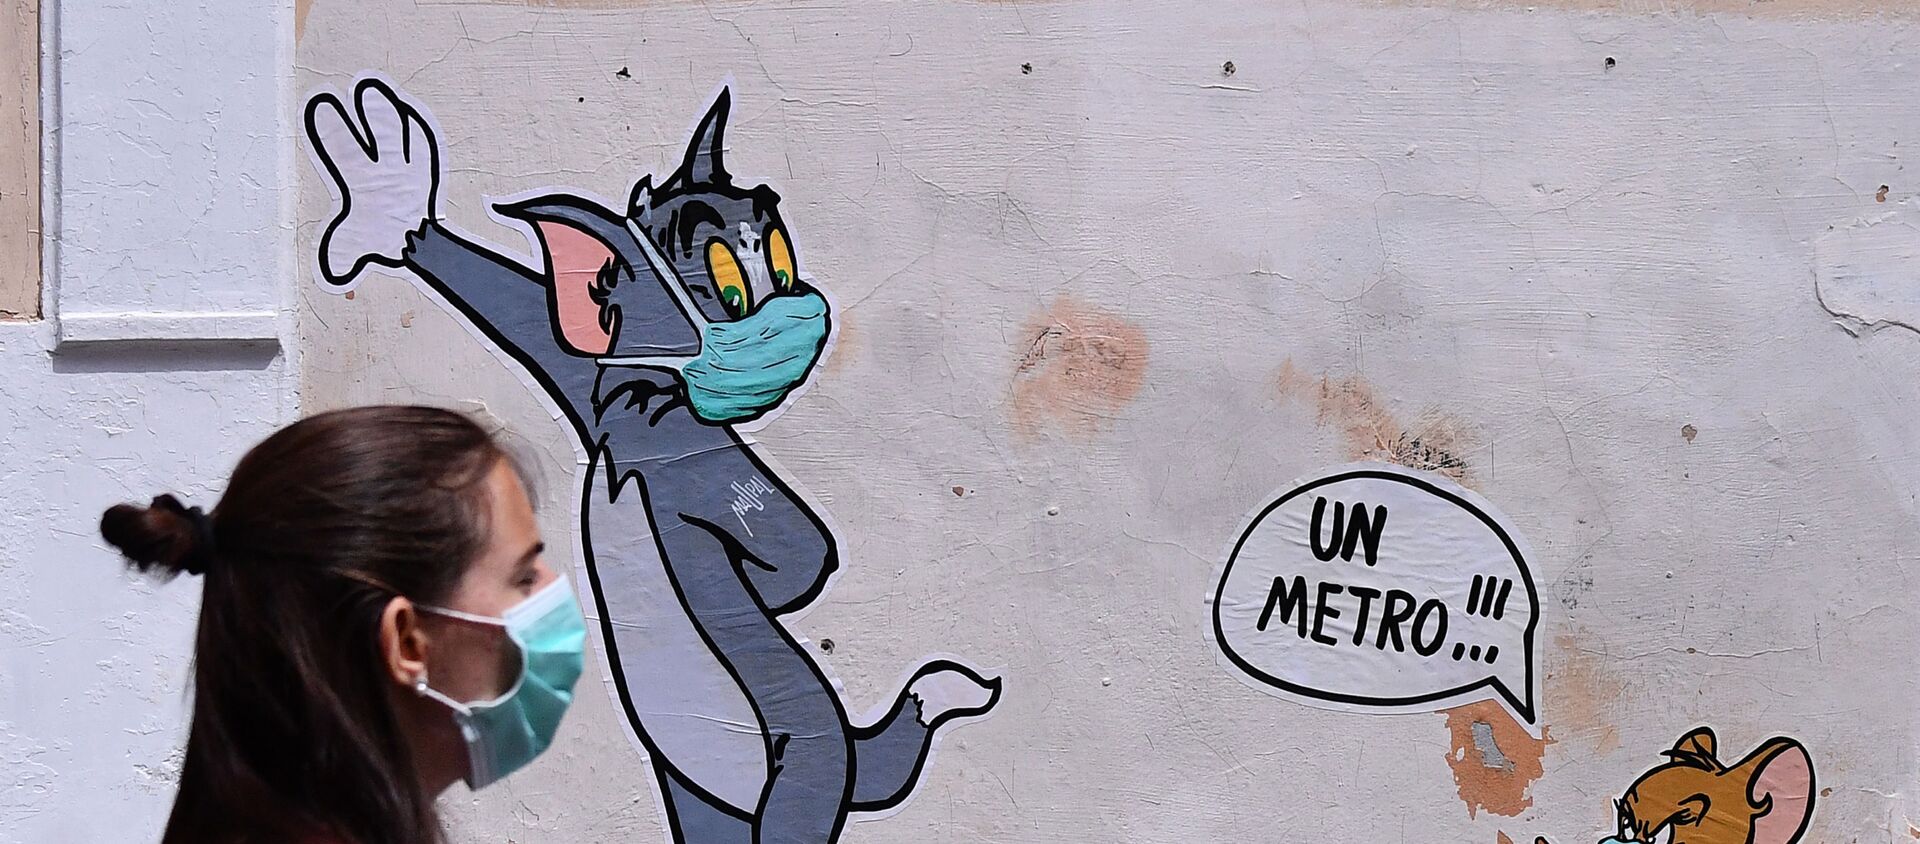 A woman wearing a face mask passes by a mural featuring William Hanna and Joseph Barbera' s characters Tom & Jerry mentioning the safe distance to be held from each other - One meter - in Rome, Friday, May 15, 2020 - Sputnik International, 1920